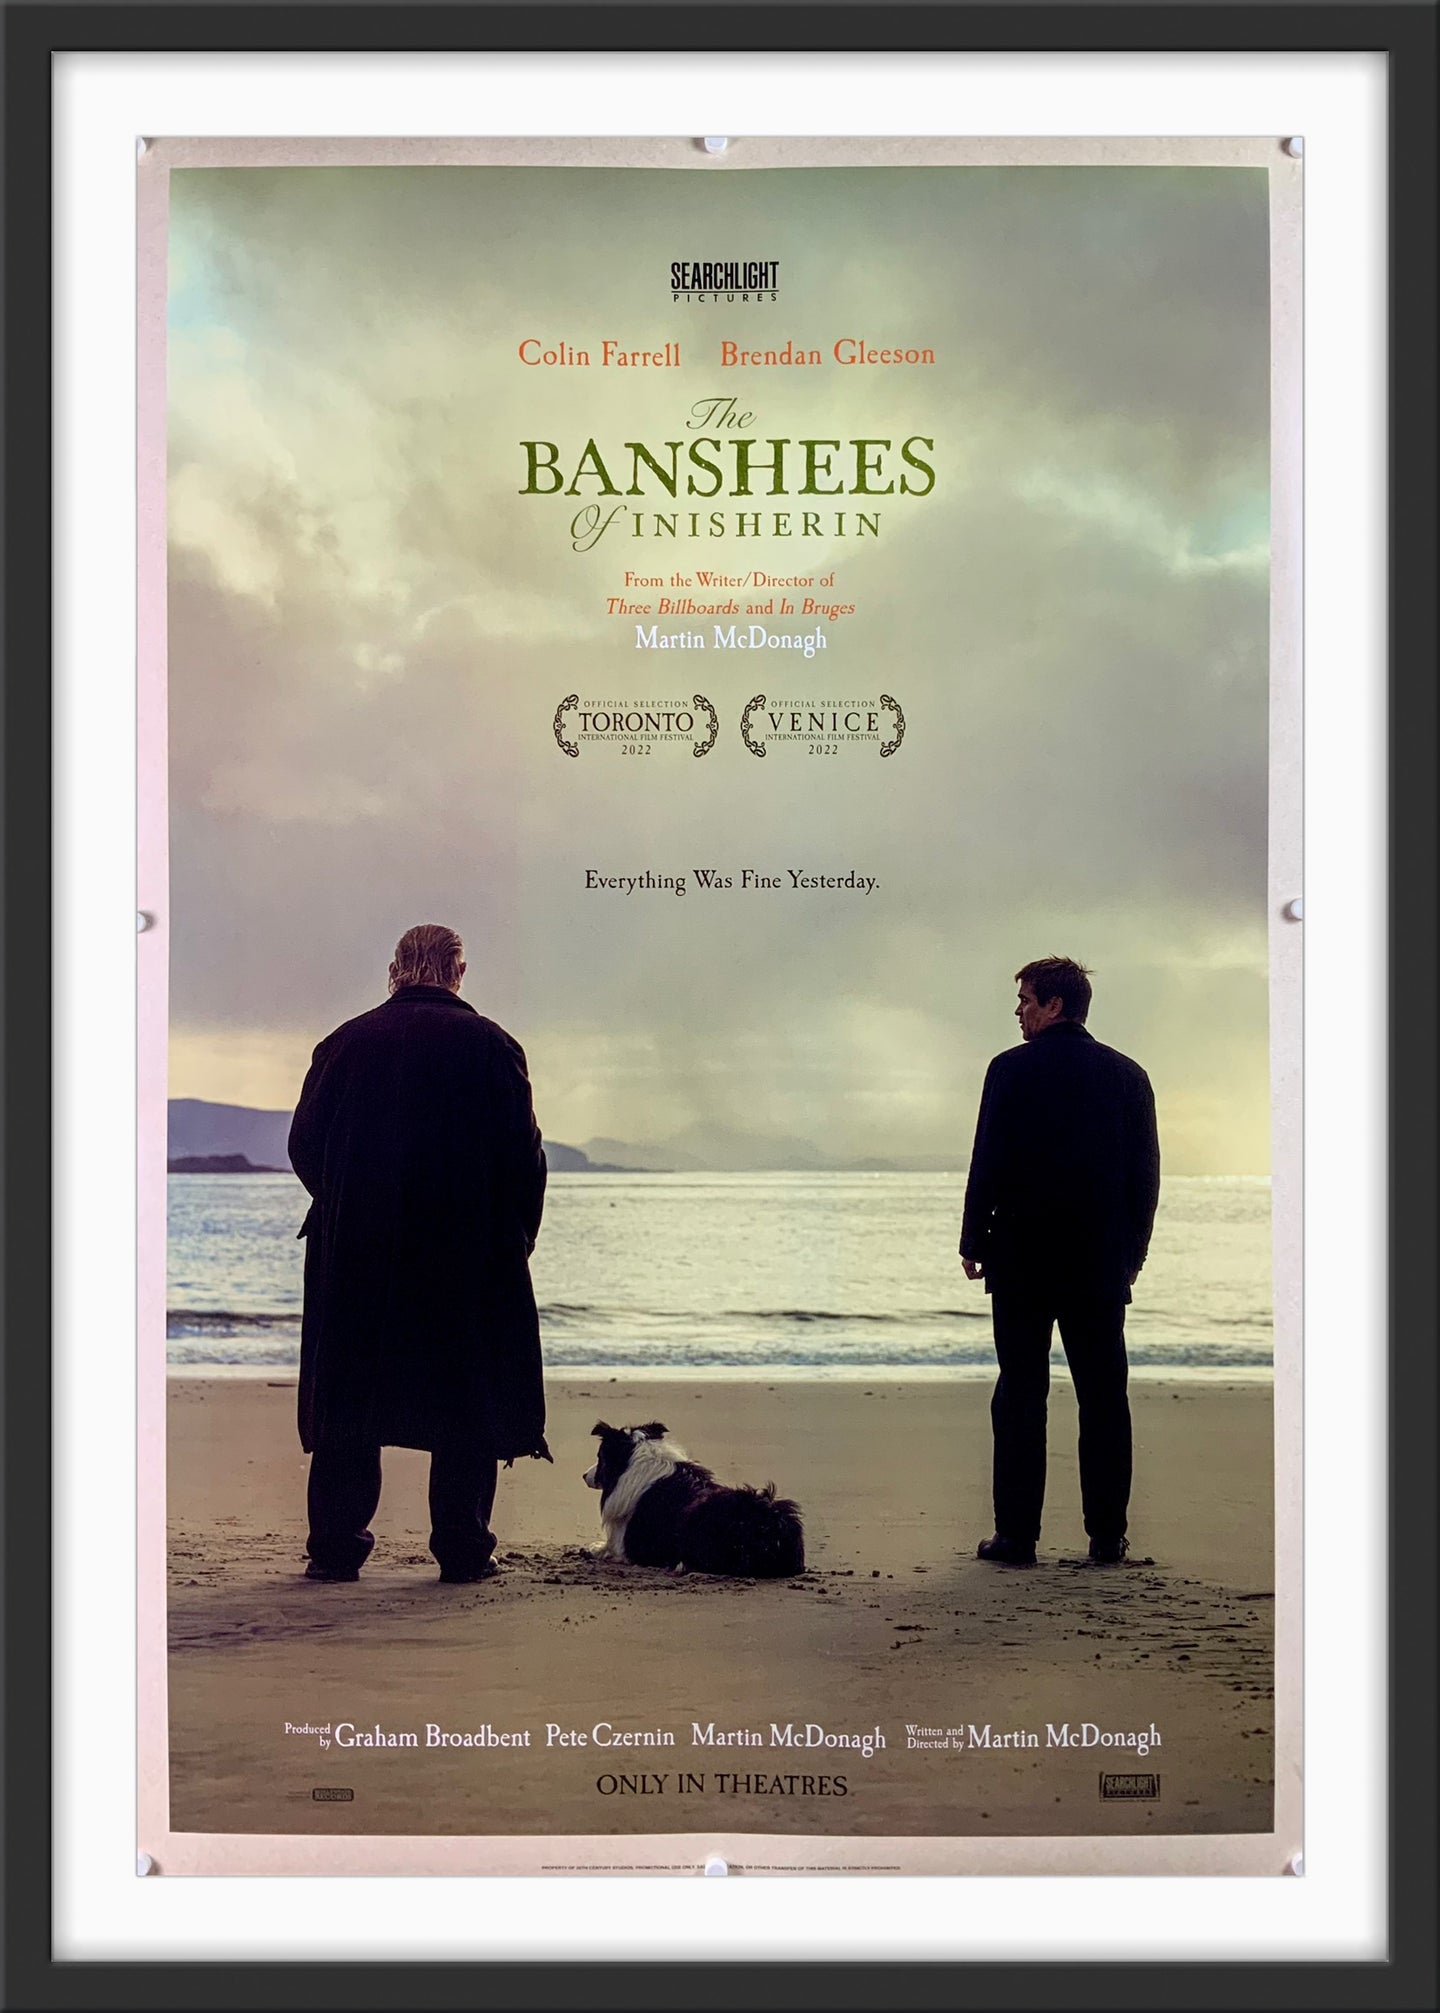 An original movie poster for the film The Banshees of Inisherin